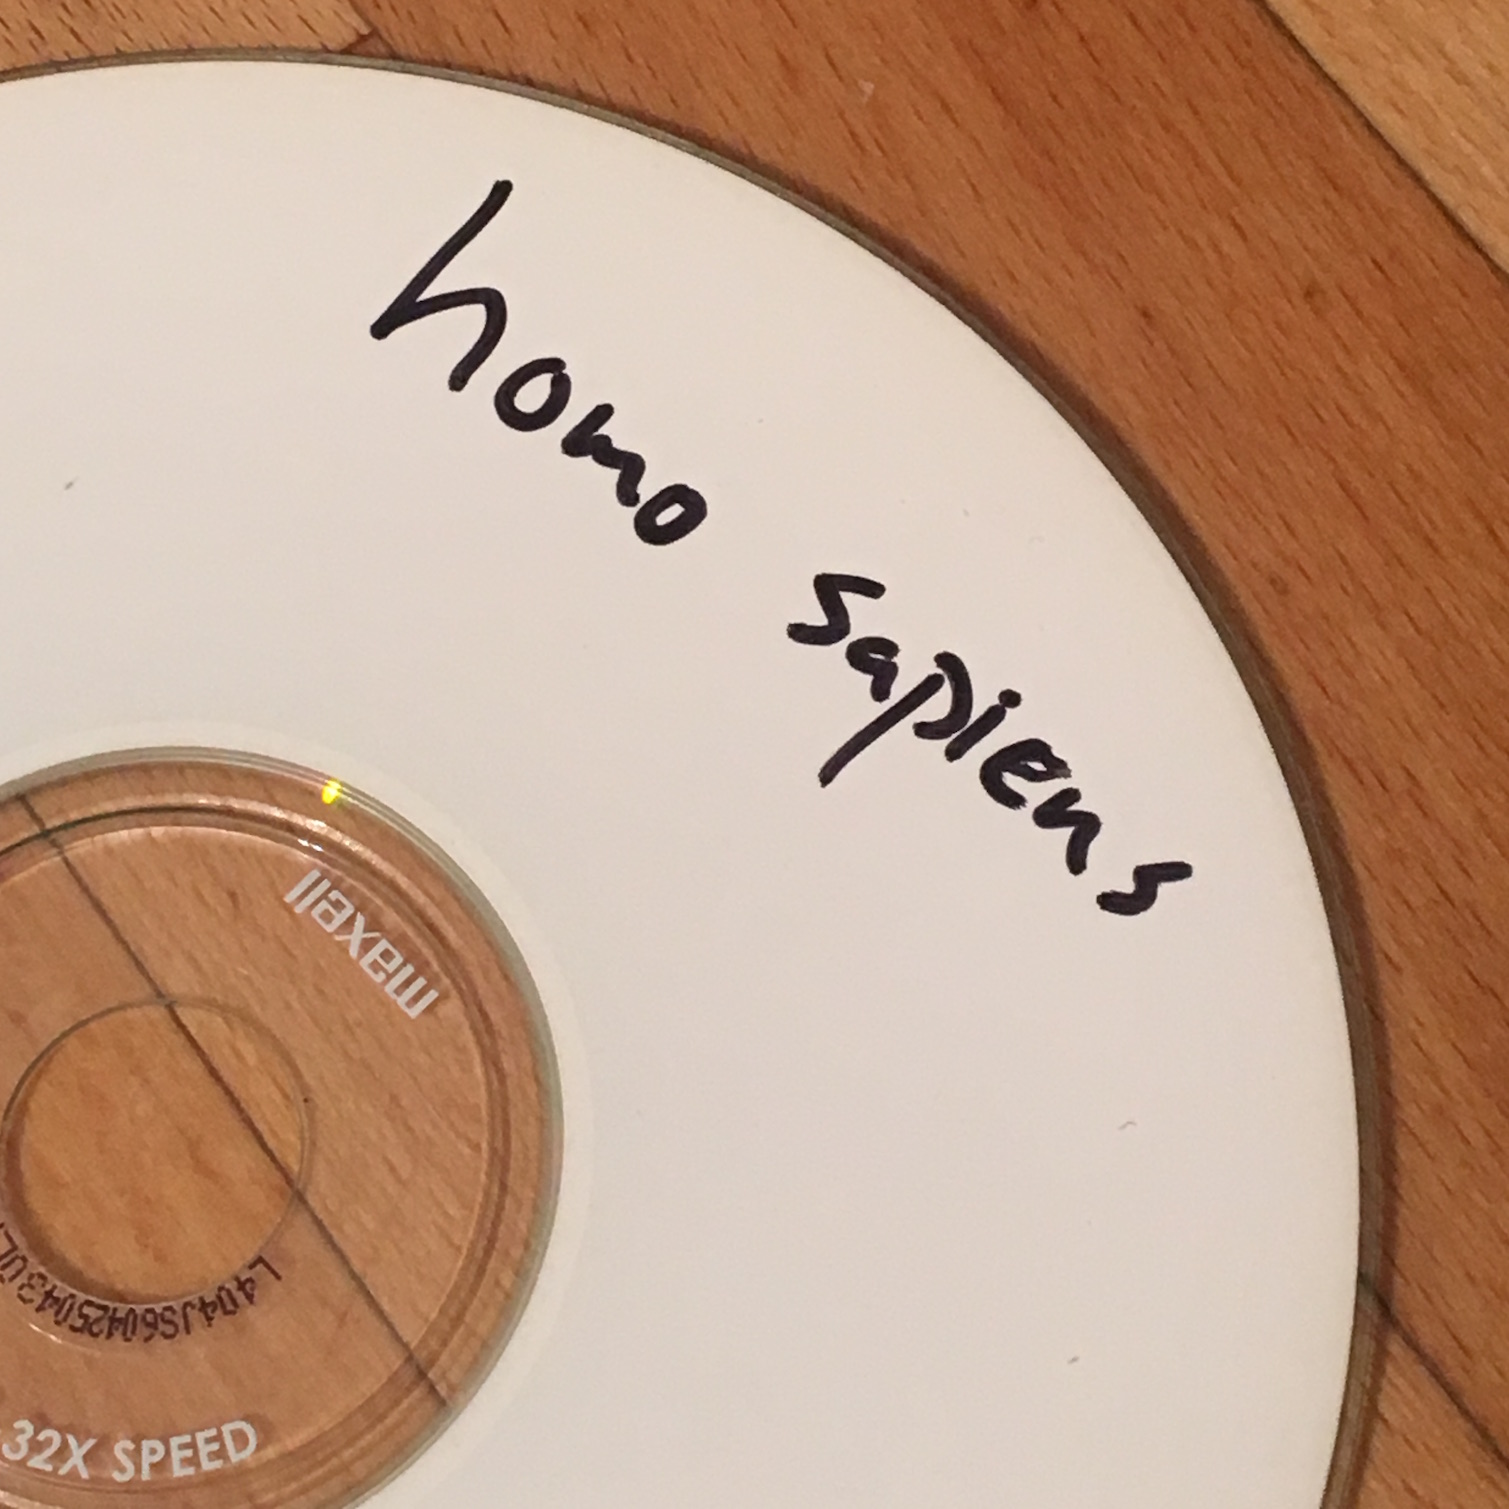 CD-R with 'homo sapiens' written on it